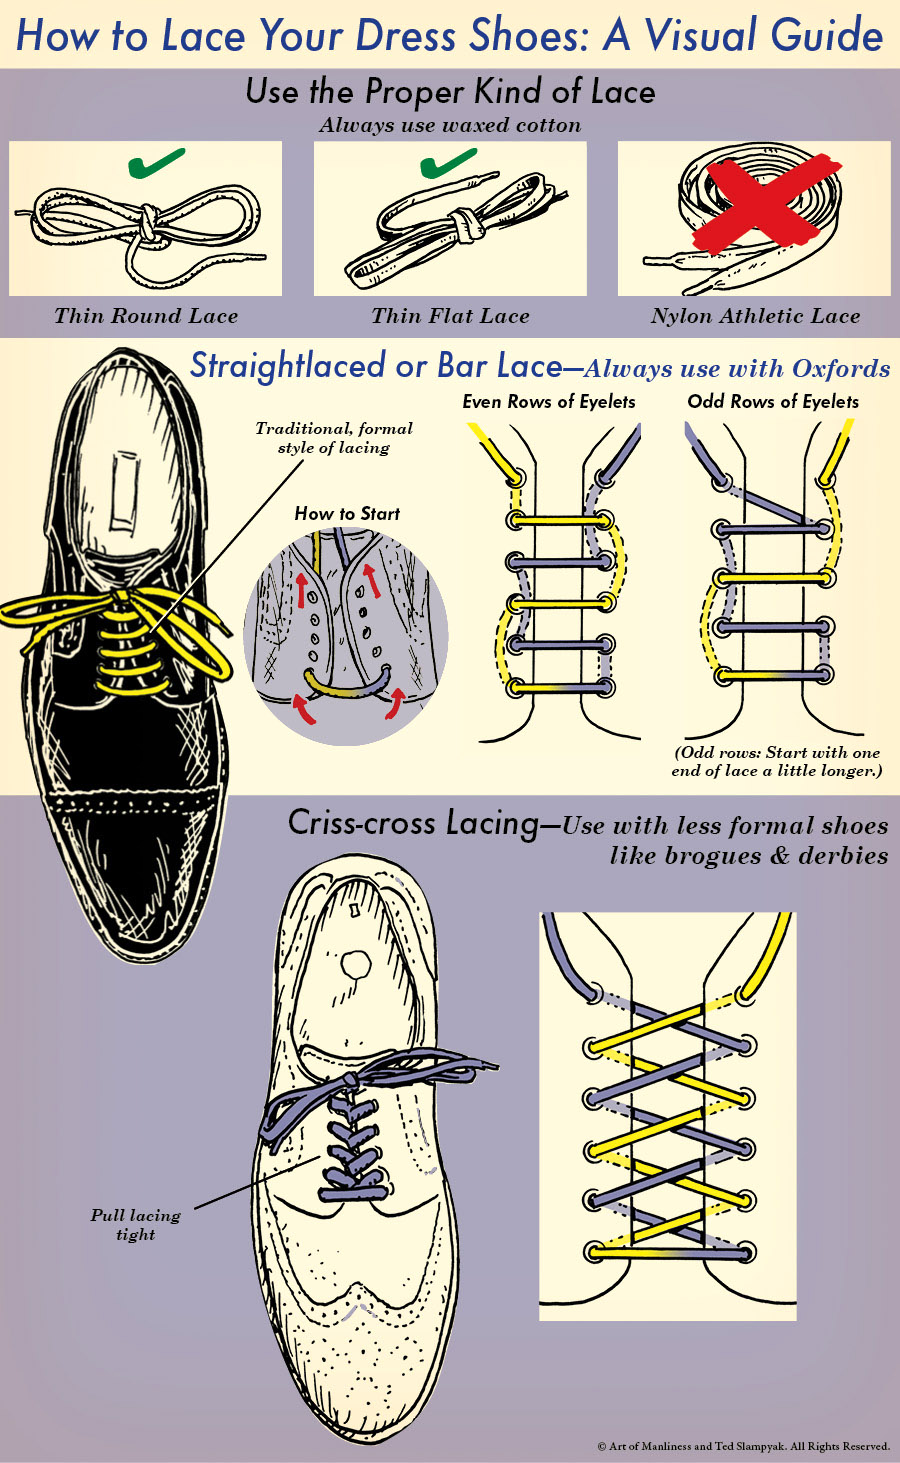 This Diagram Shows How To Properly Lace Your Dress Shoes